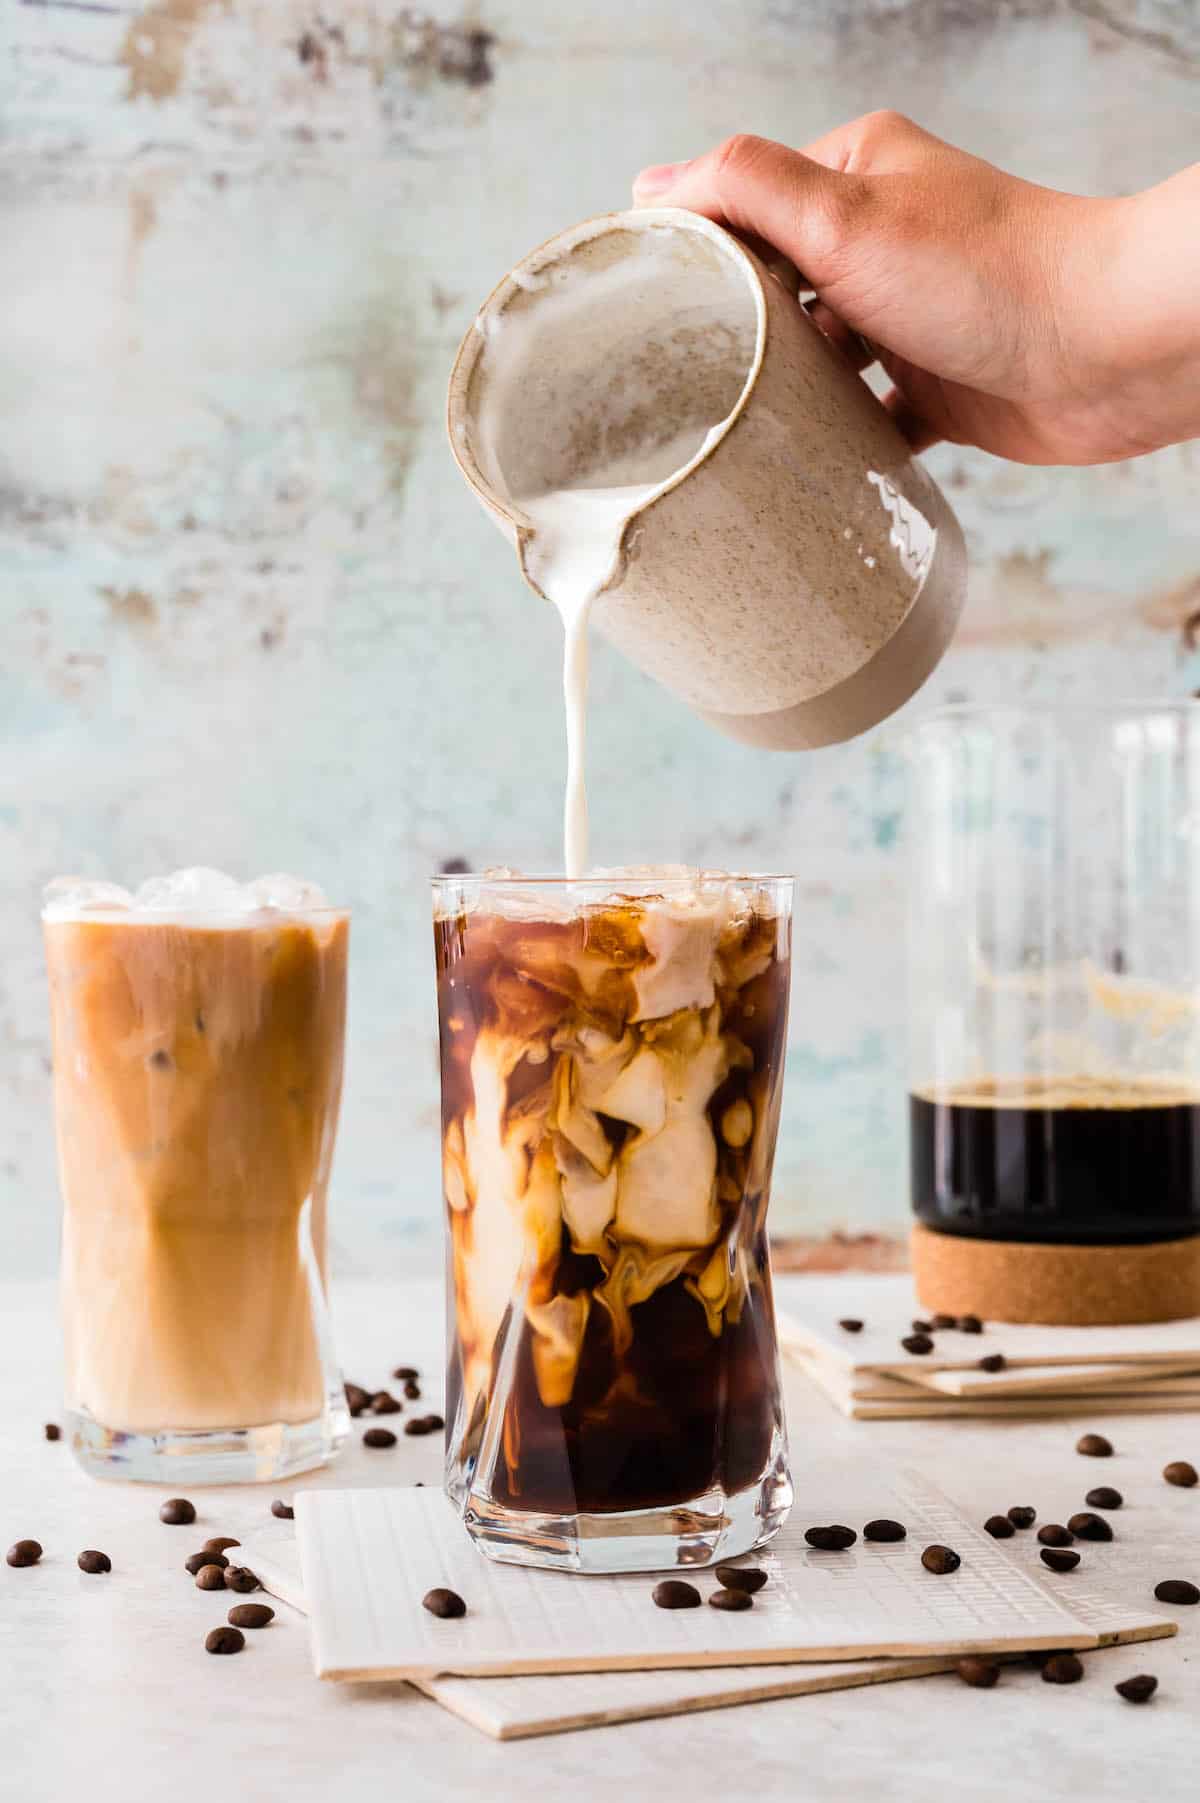 How To Make The Best Cold Brew Coffee Recipe - The Protein Chef